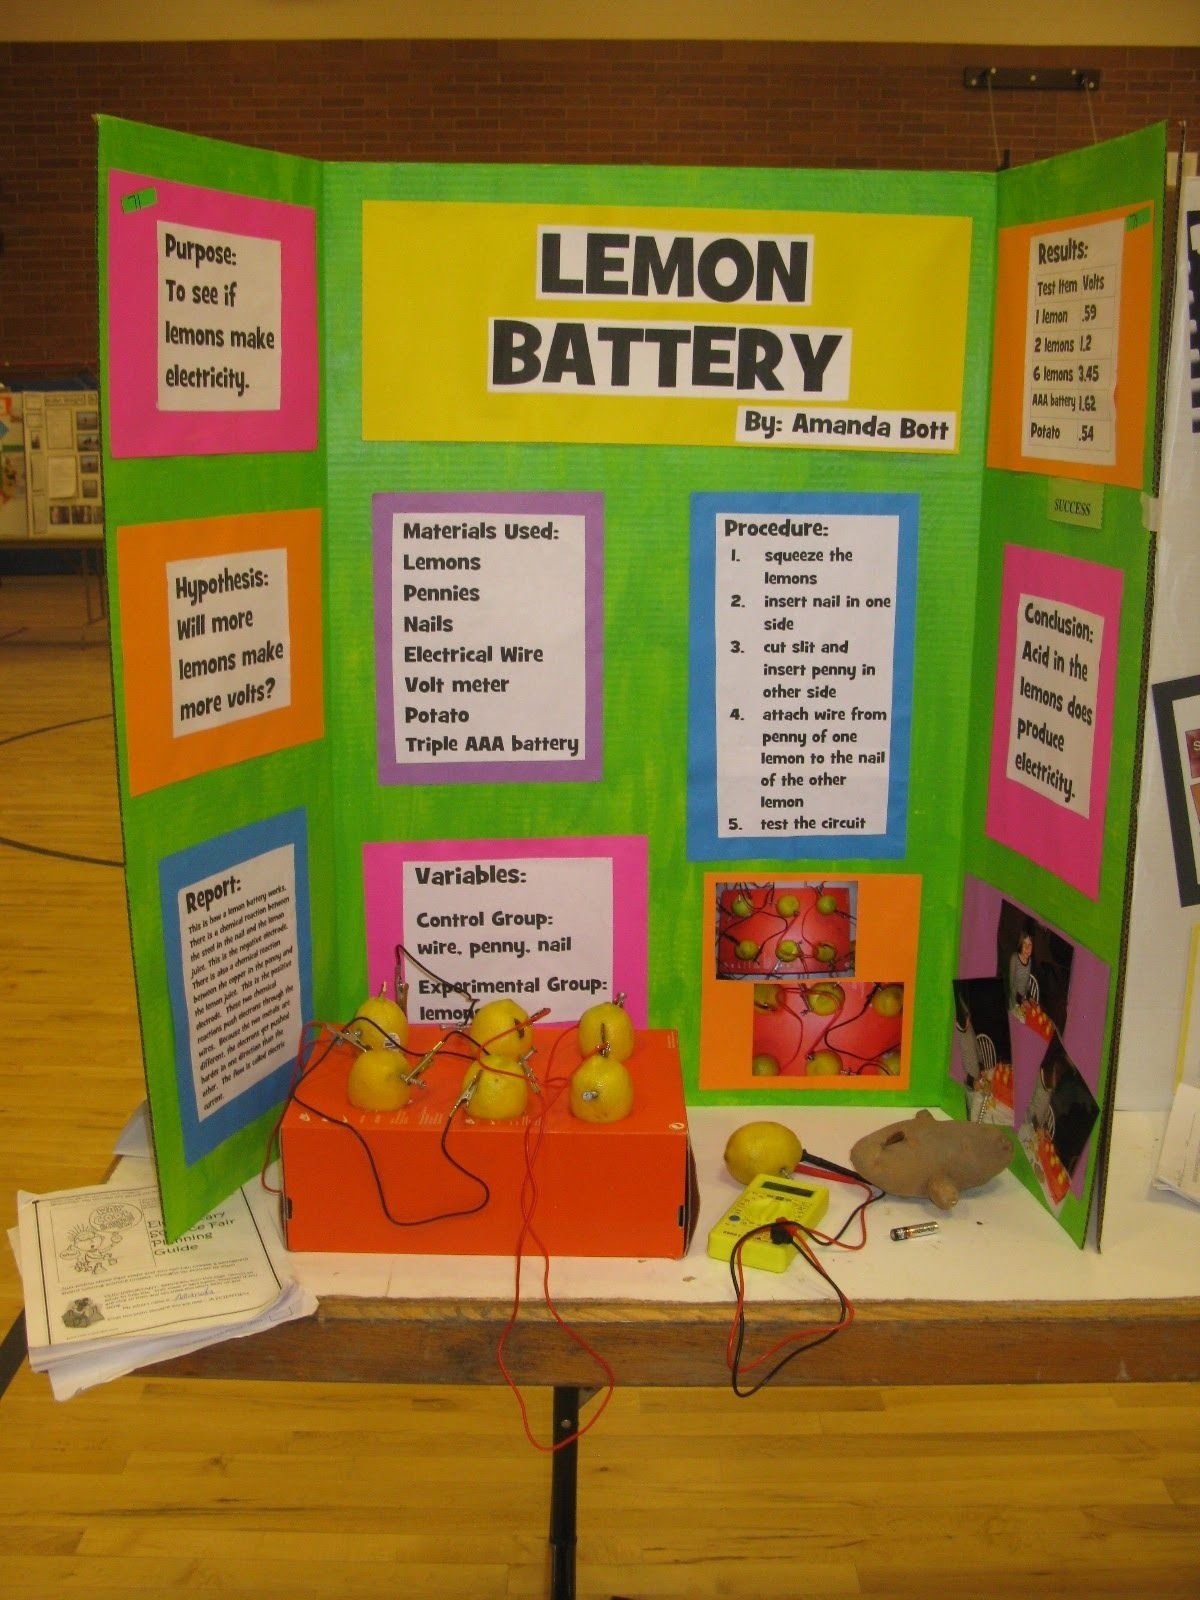 10 Lovable Ideas For A Science Project the science of my life updated declo science fair with newspaper 60 2022